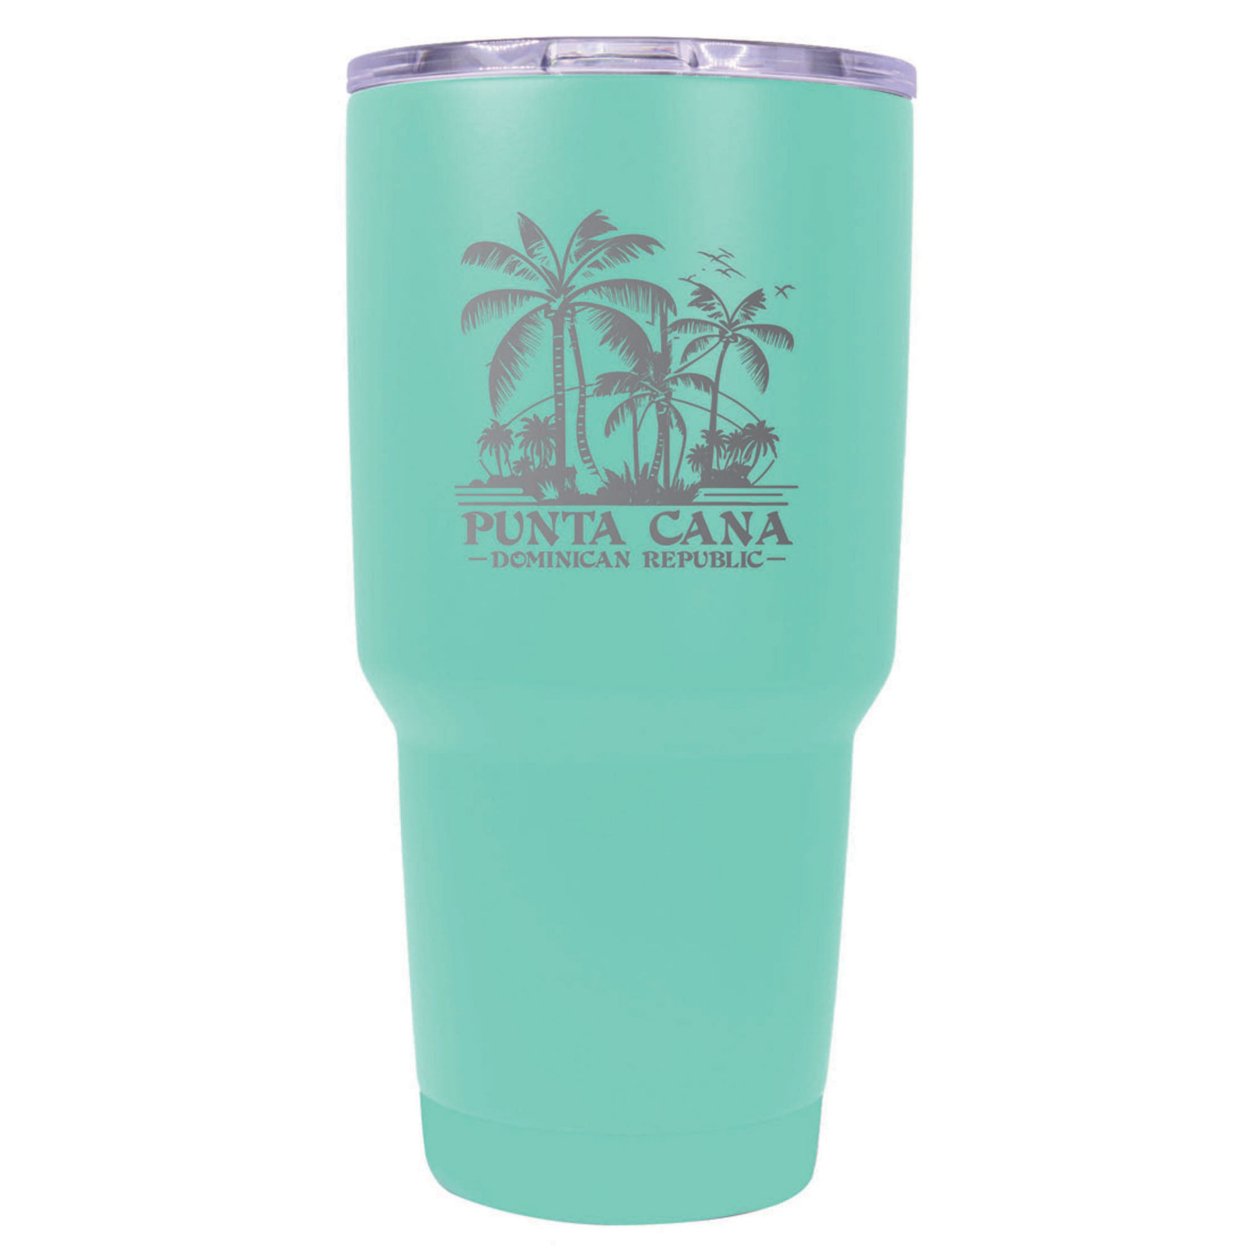 Punta Cana Dominican Republic Souvenir 24 Oz Insulated Stainless Steel Tumbler Etched - Rose Gold, PALM BEACH